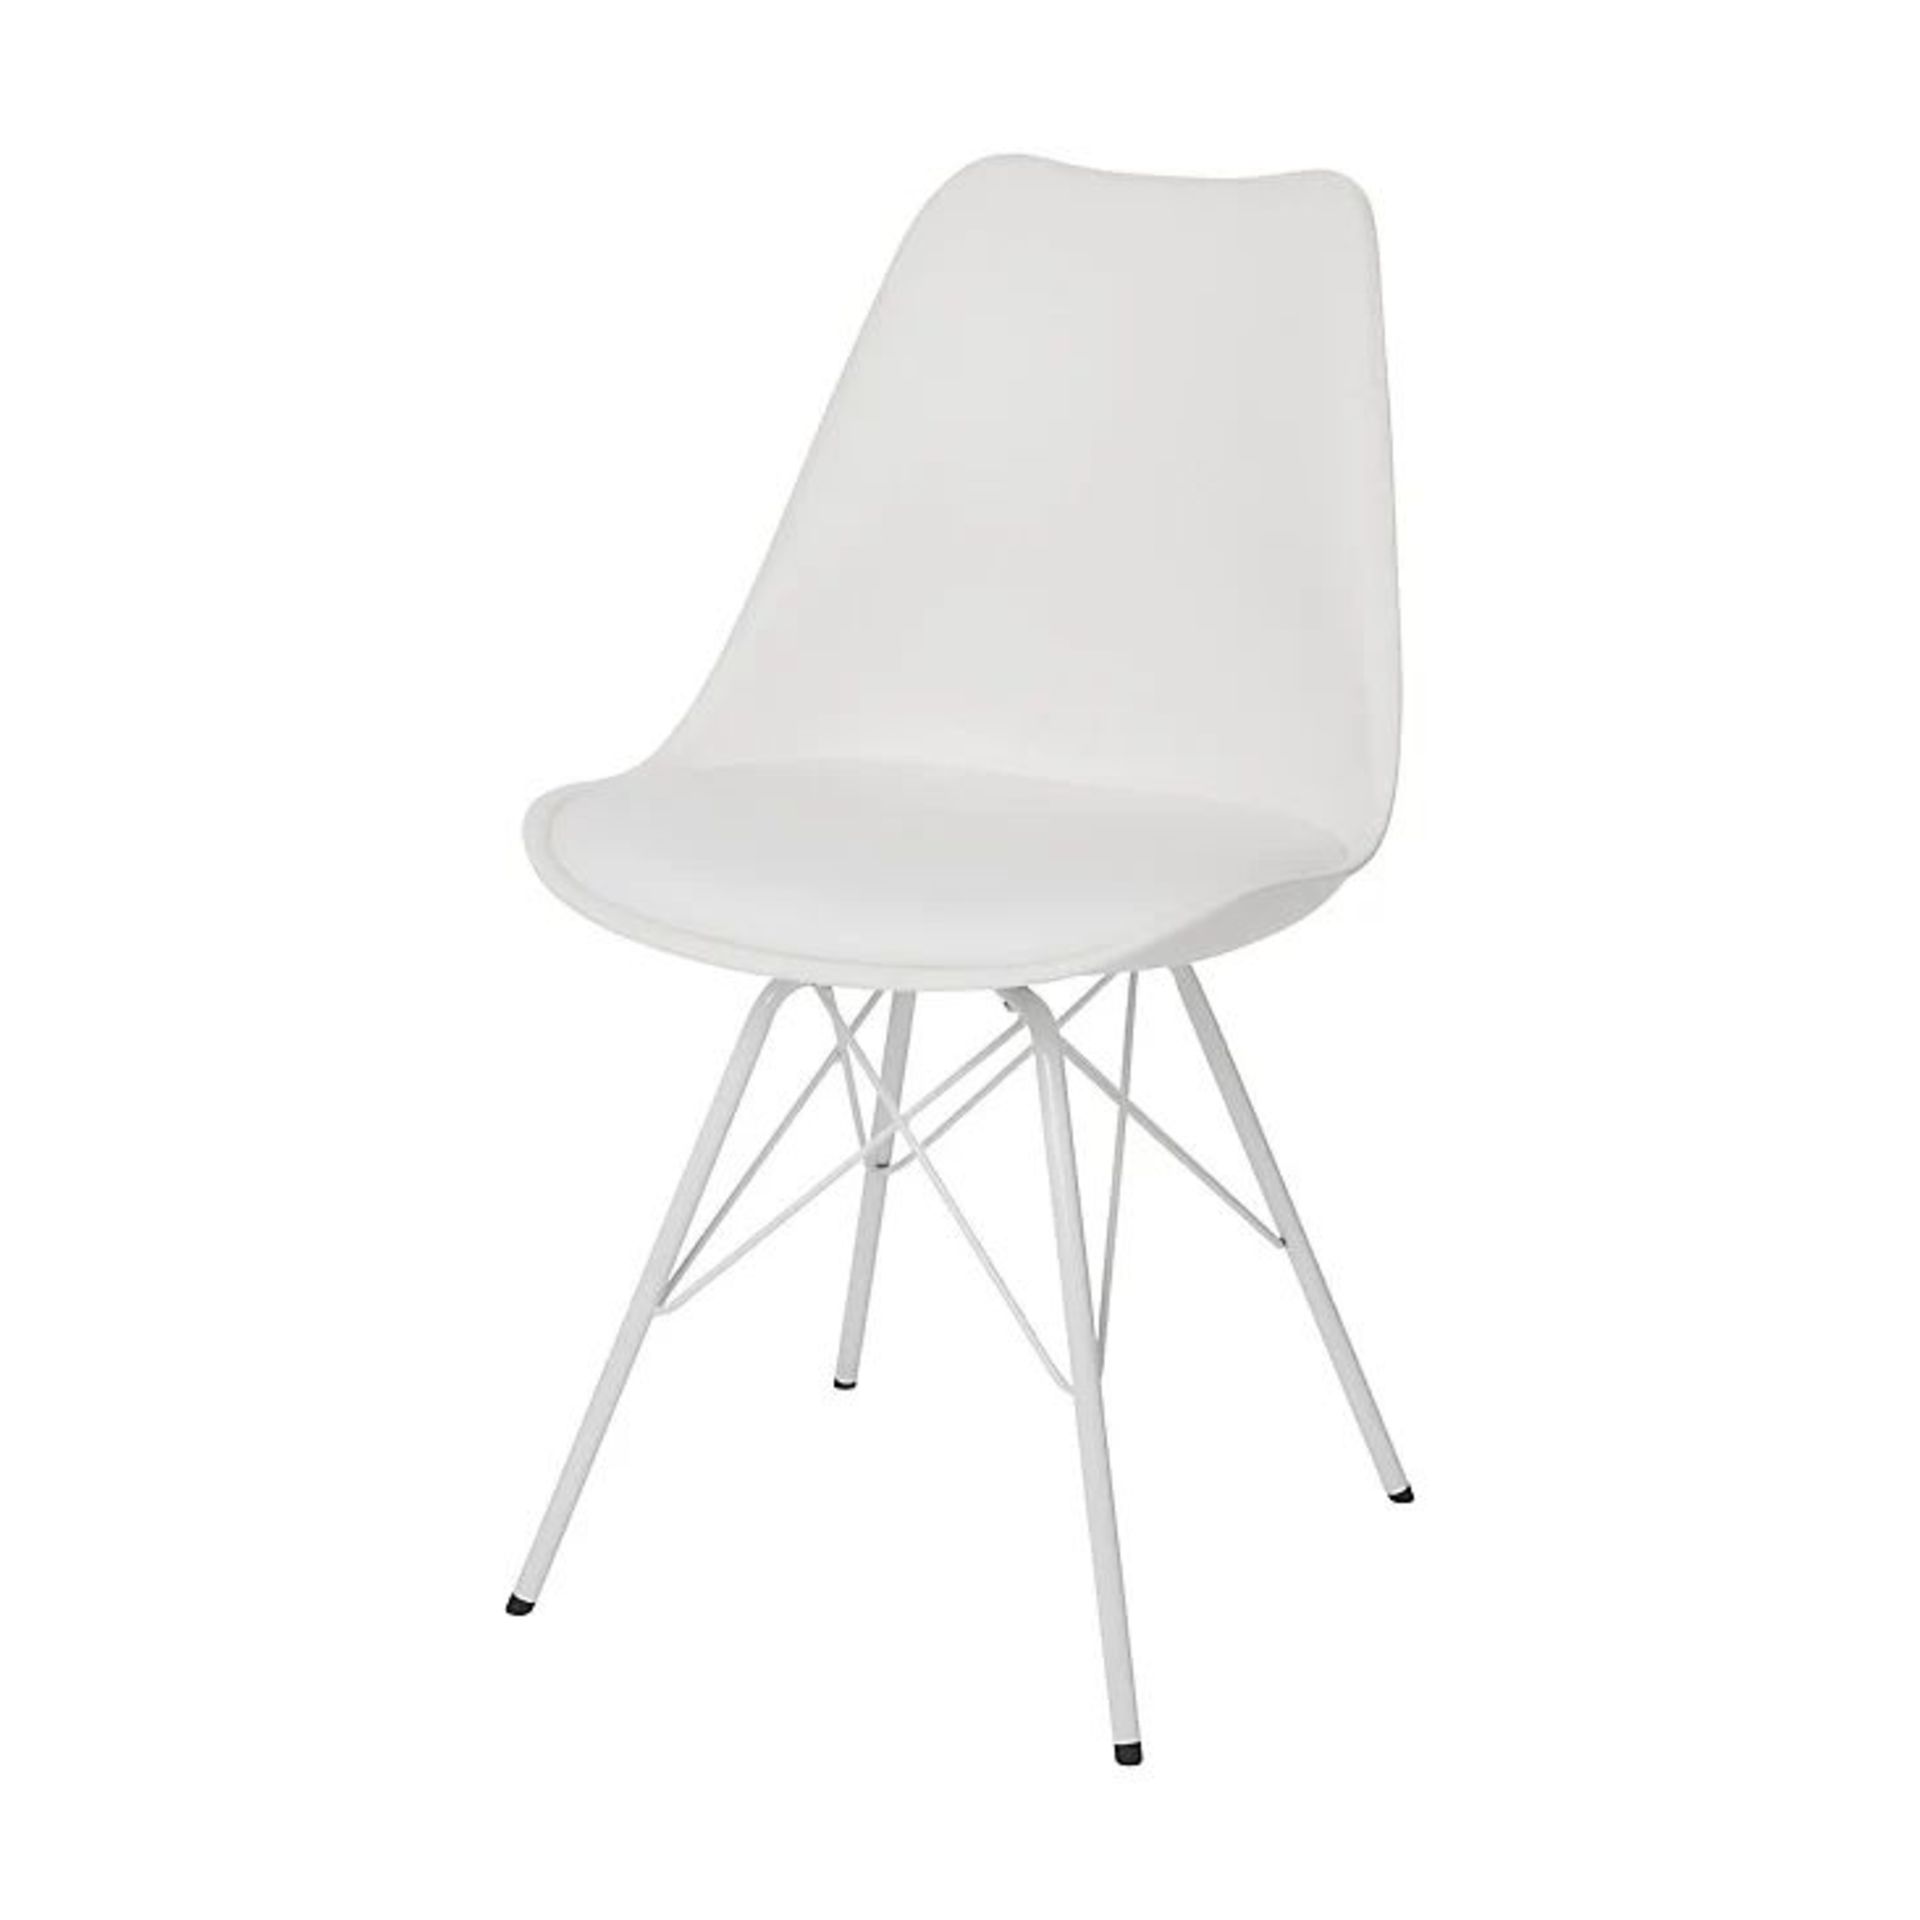 2 X BRAND NEW WHITE FIXED LEG DINING CHAIRS R10-8